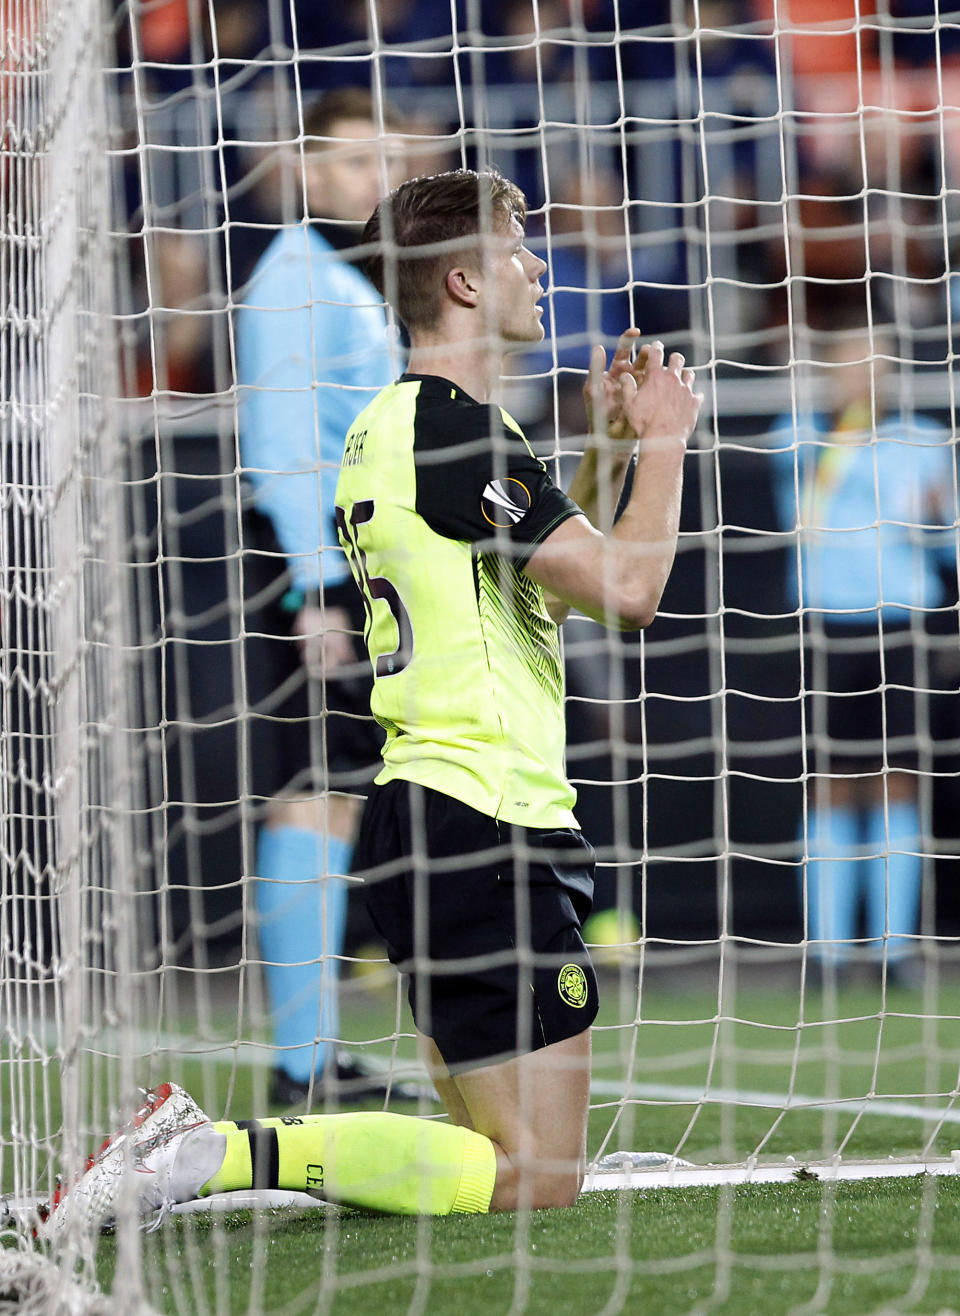 Celtic's Kristoffer Ajer reacts after failing to score against Valencia during the Europa League round of 32, second leg, soccer match between Valencia and Celtic at the Mestalla stadium in Valencia, Spain, Thursday, Feb. 21, 2019. (AP Photo/Alberto Saiz)